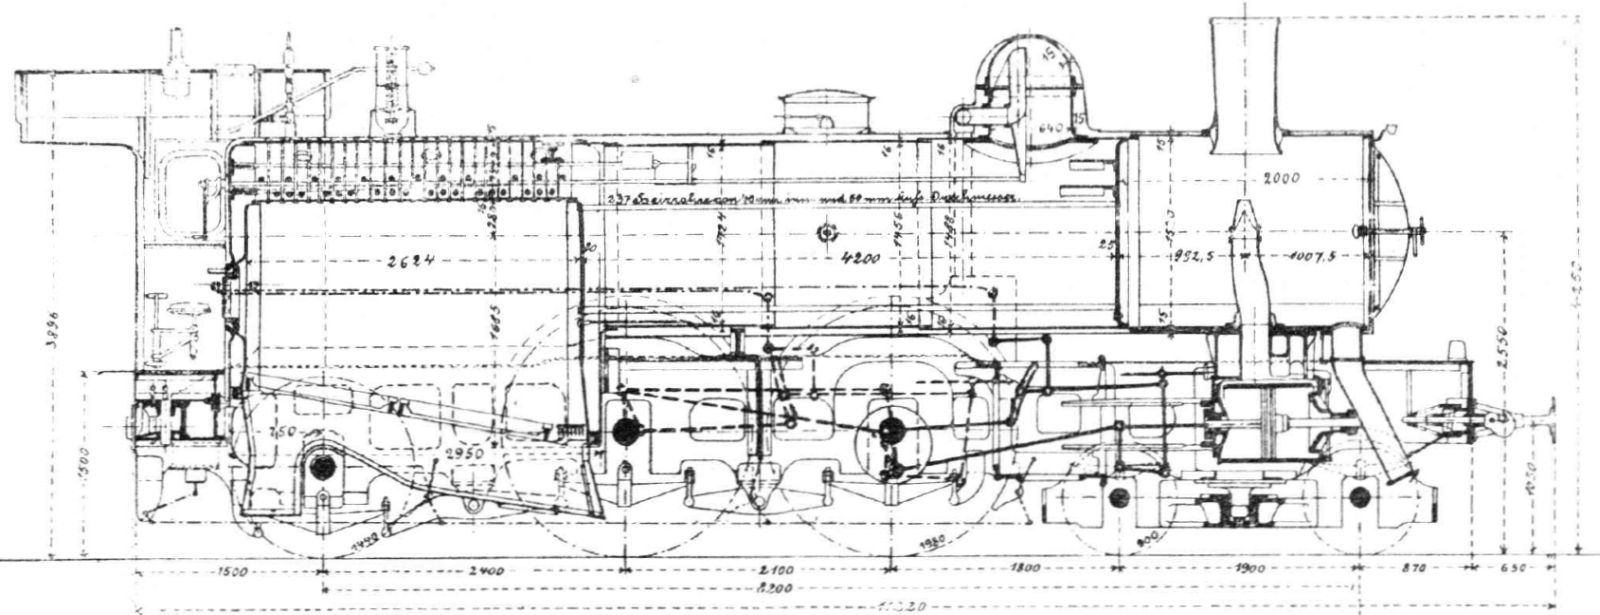 Sectional drawing of the De Glehn type with an elongated firebox